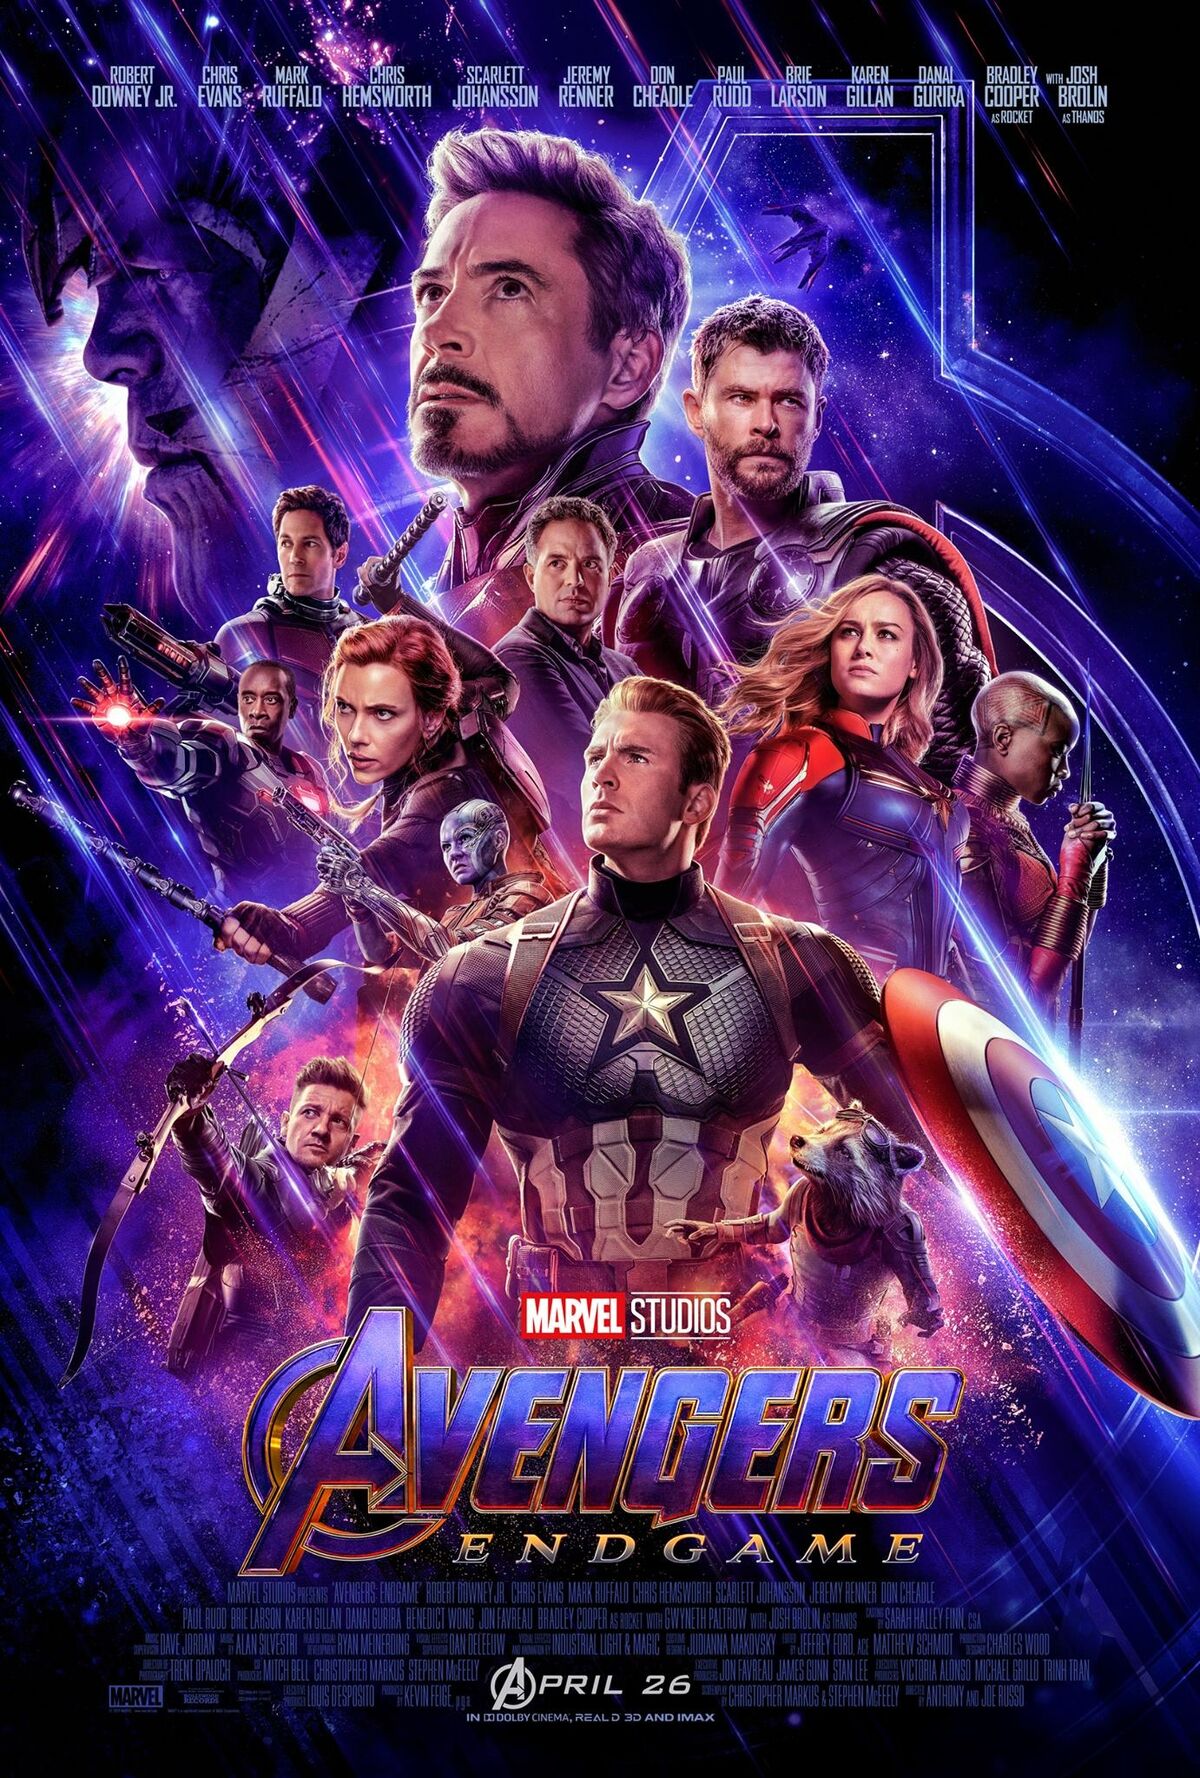 Download The Avengers: Endgame cast comes together for one last heroic  mission.